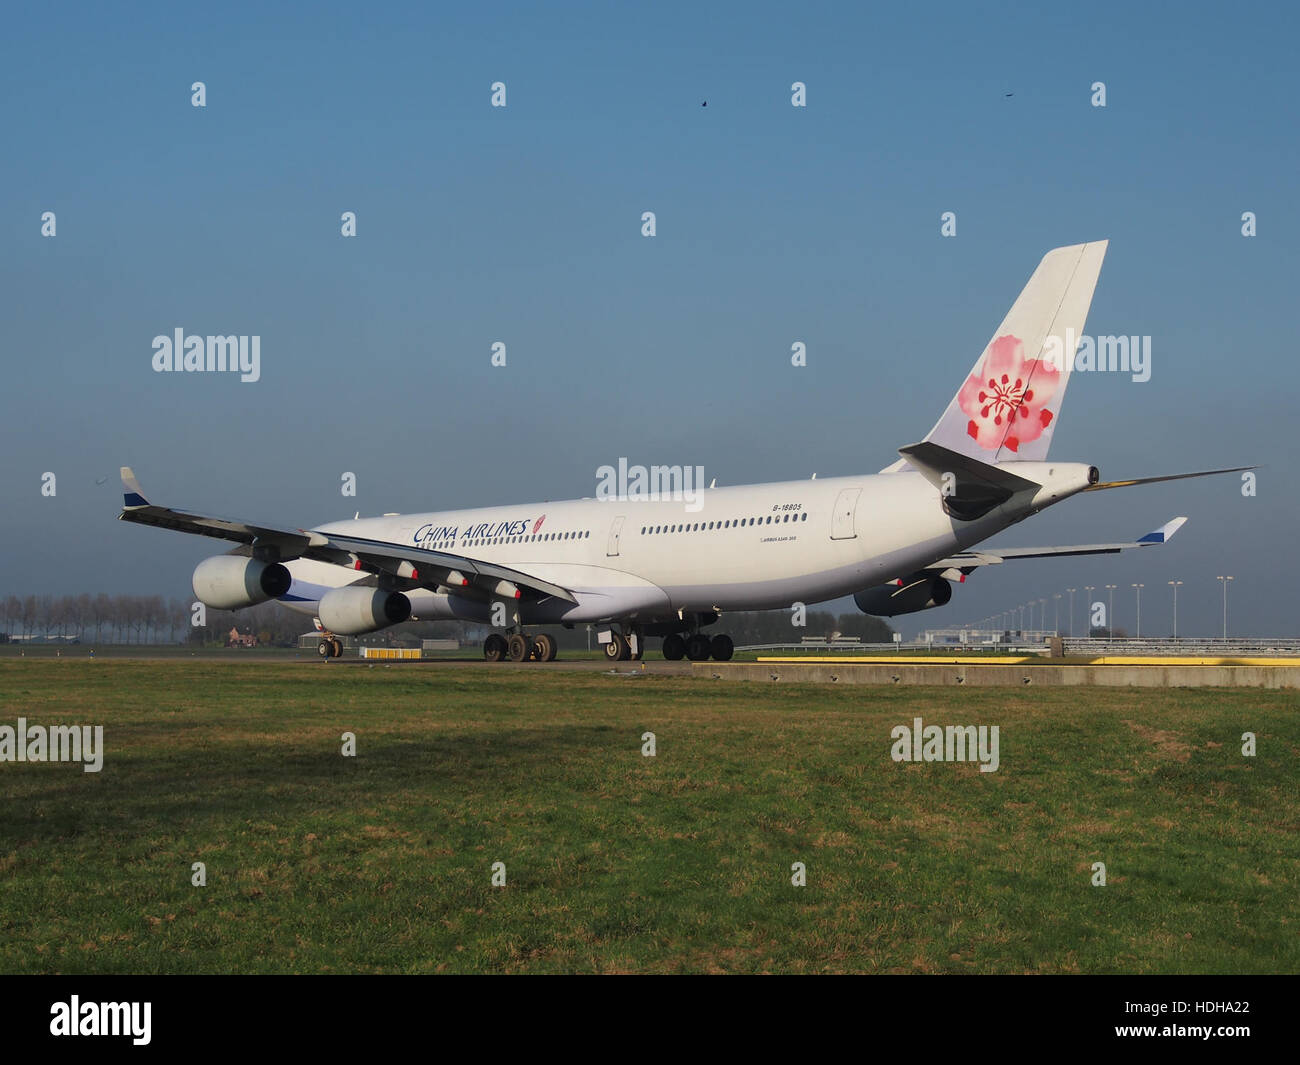 B-18805 (Flugzeuge) China Airlines Airbus A340-313 - Cn 415 am Schiphol pic6 Stockfoto